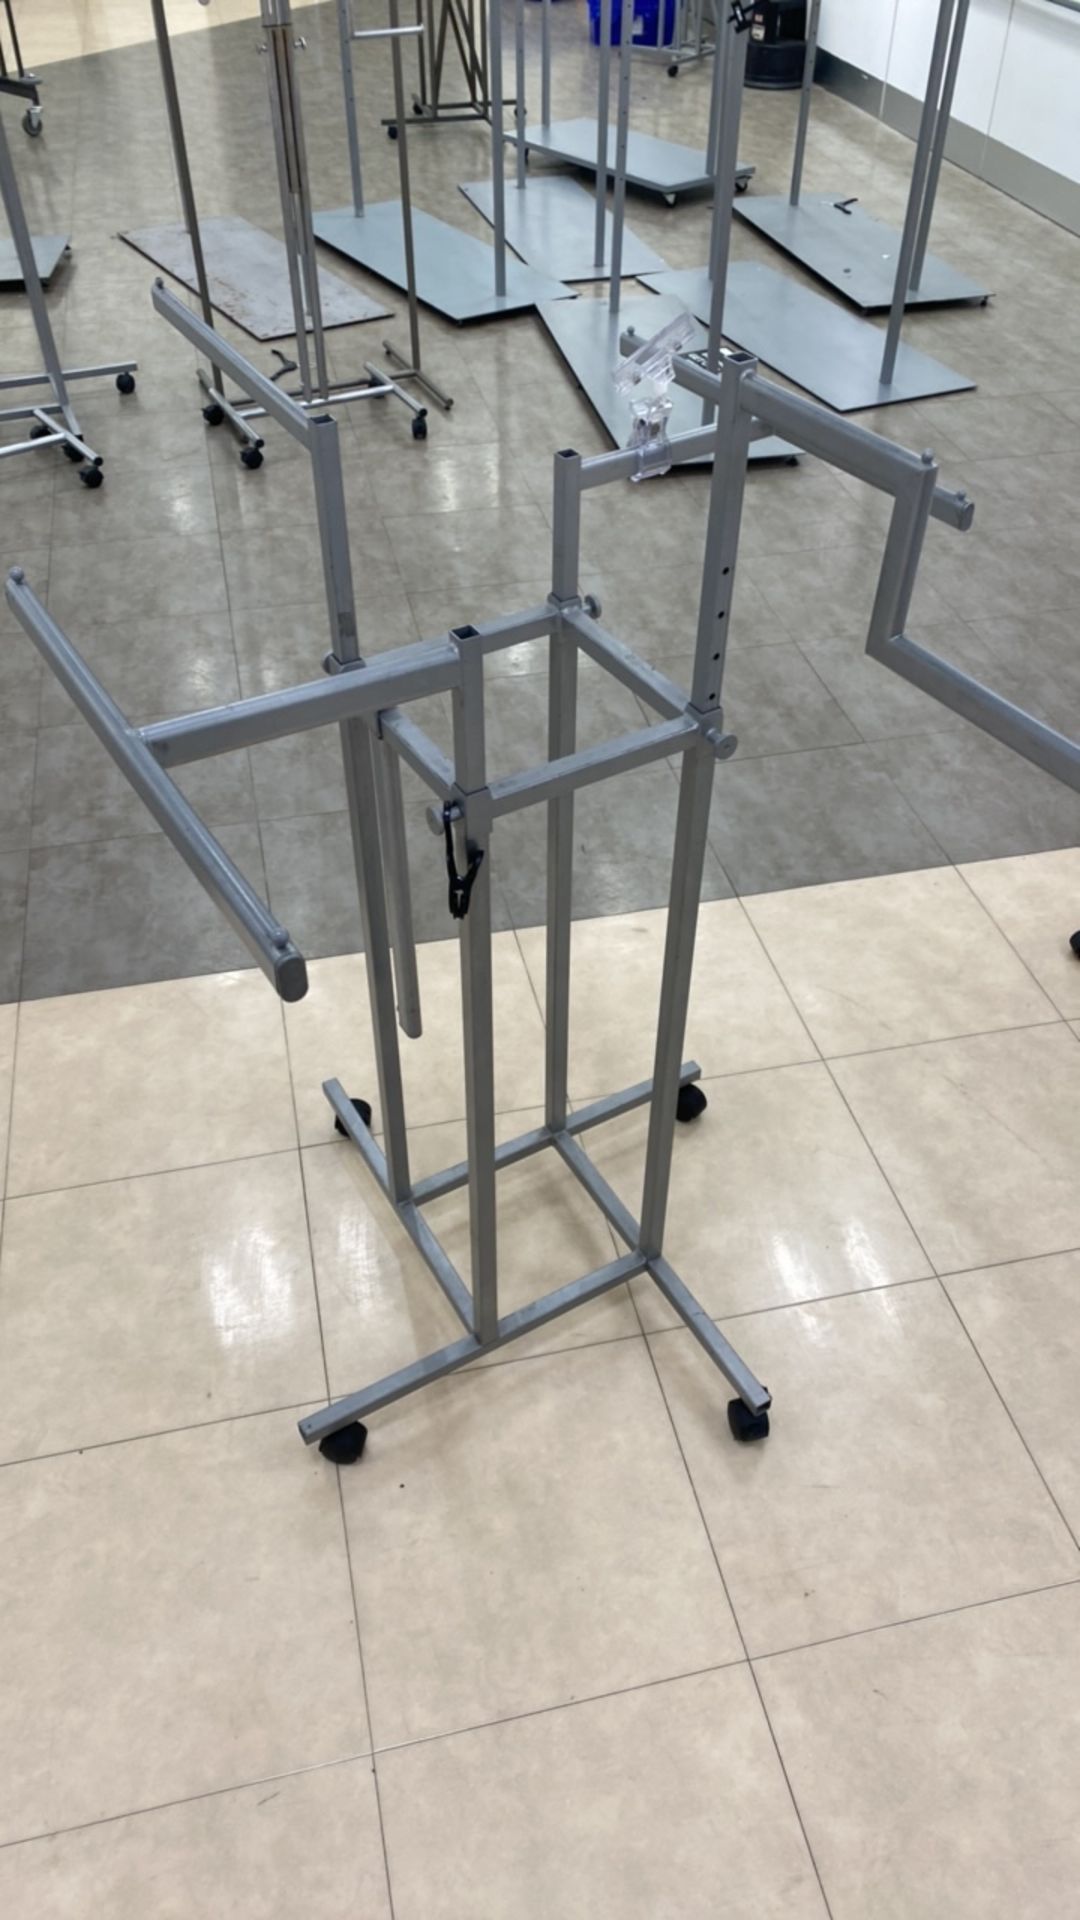 4 way adjustable clothes stand on wheels x 4 - Image 2 of 3